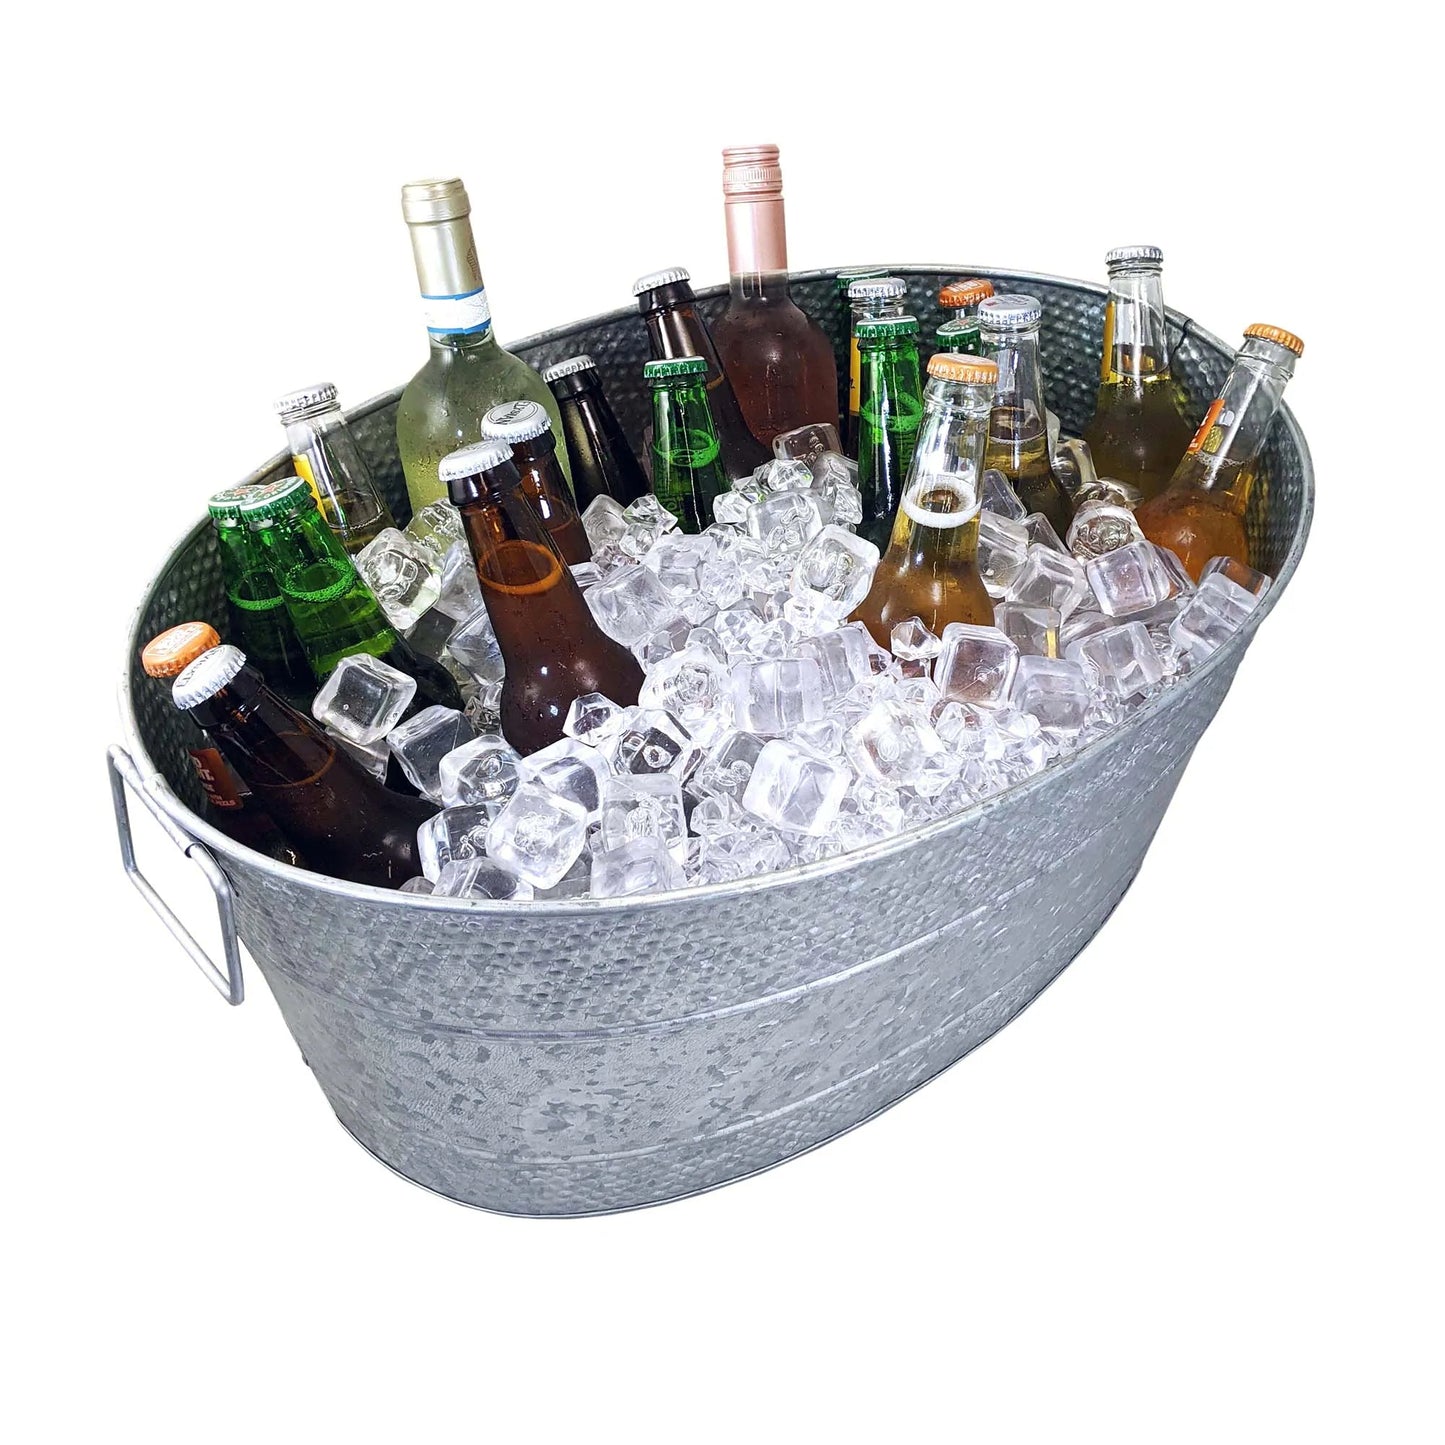 Oval drink tub to hold and chill wine, beer, and other drinks for parties when serving and share with family and friends or party guests.  Made of galvanized metal with hammered exterior and sealed bottom to prevent leaking.